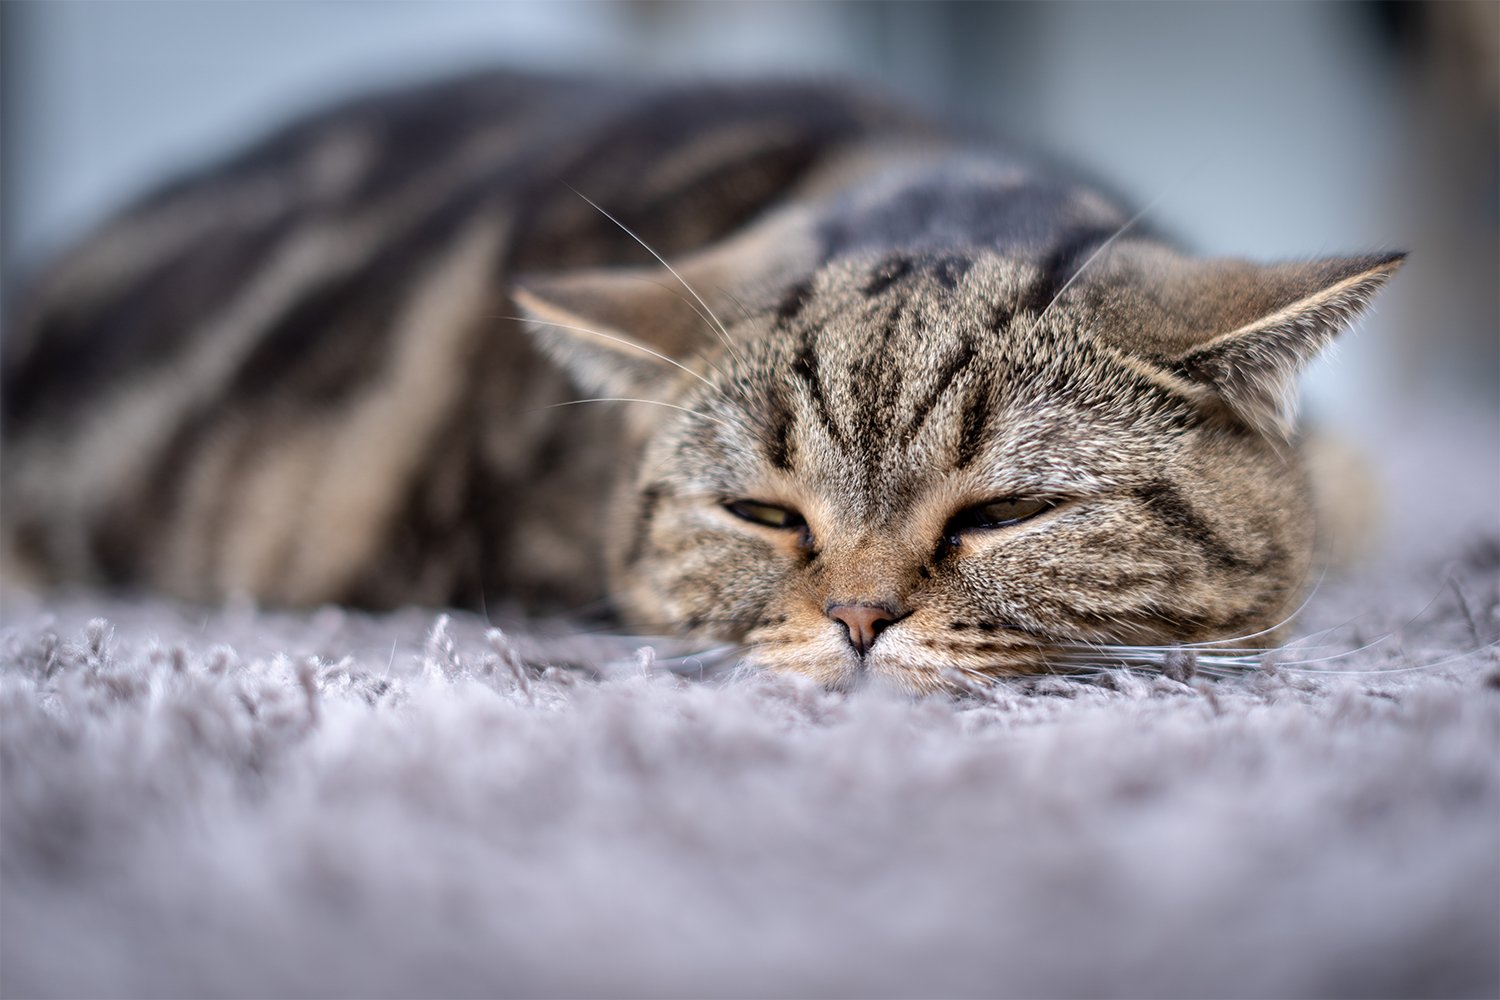 Pain Relief For Cats: Safe Pain Medications